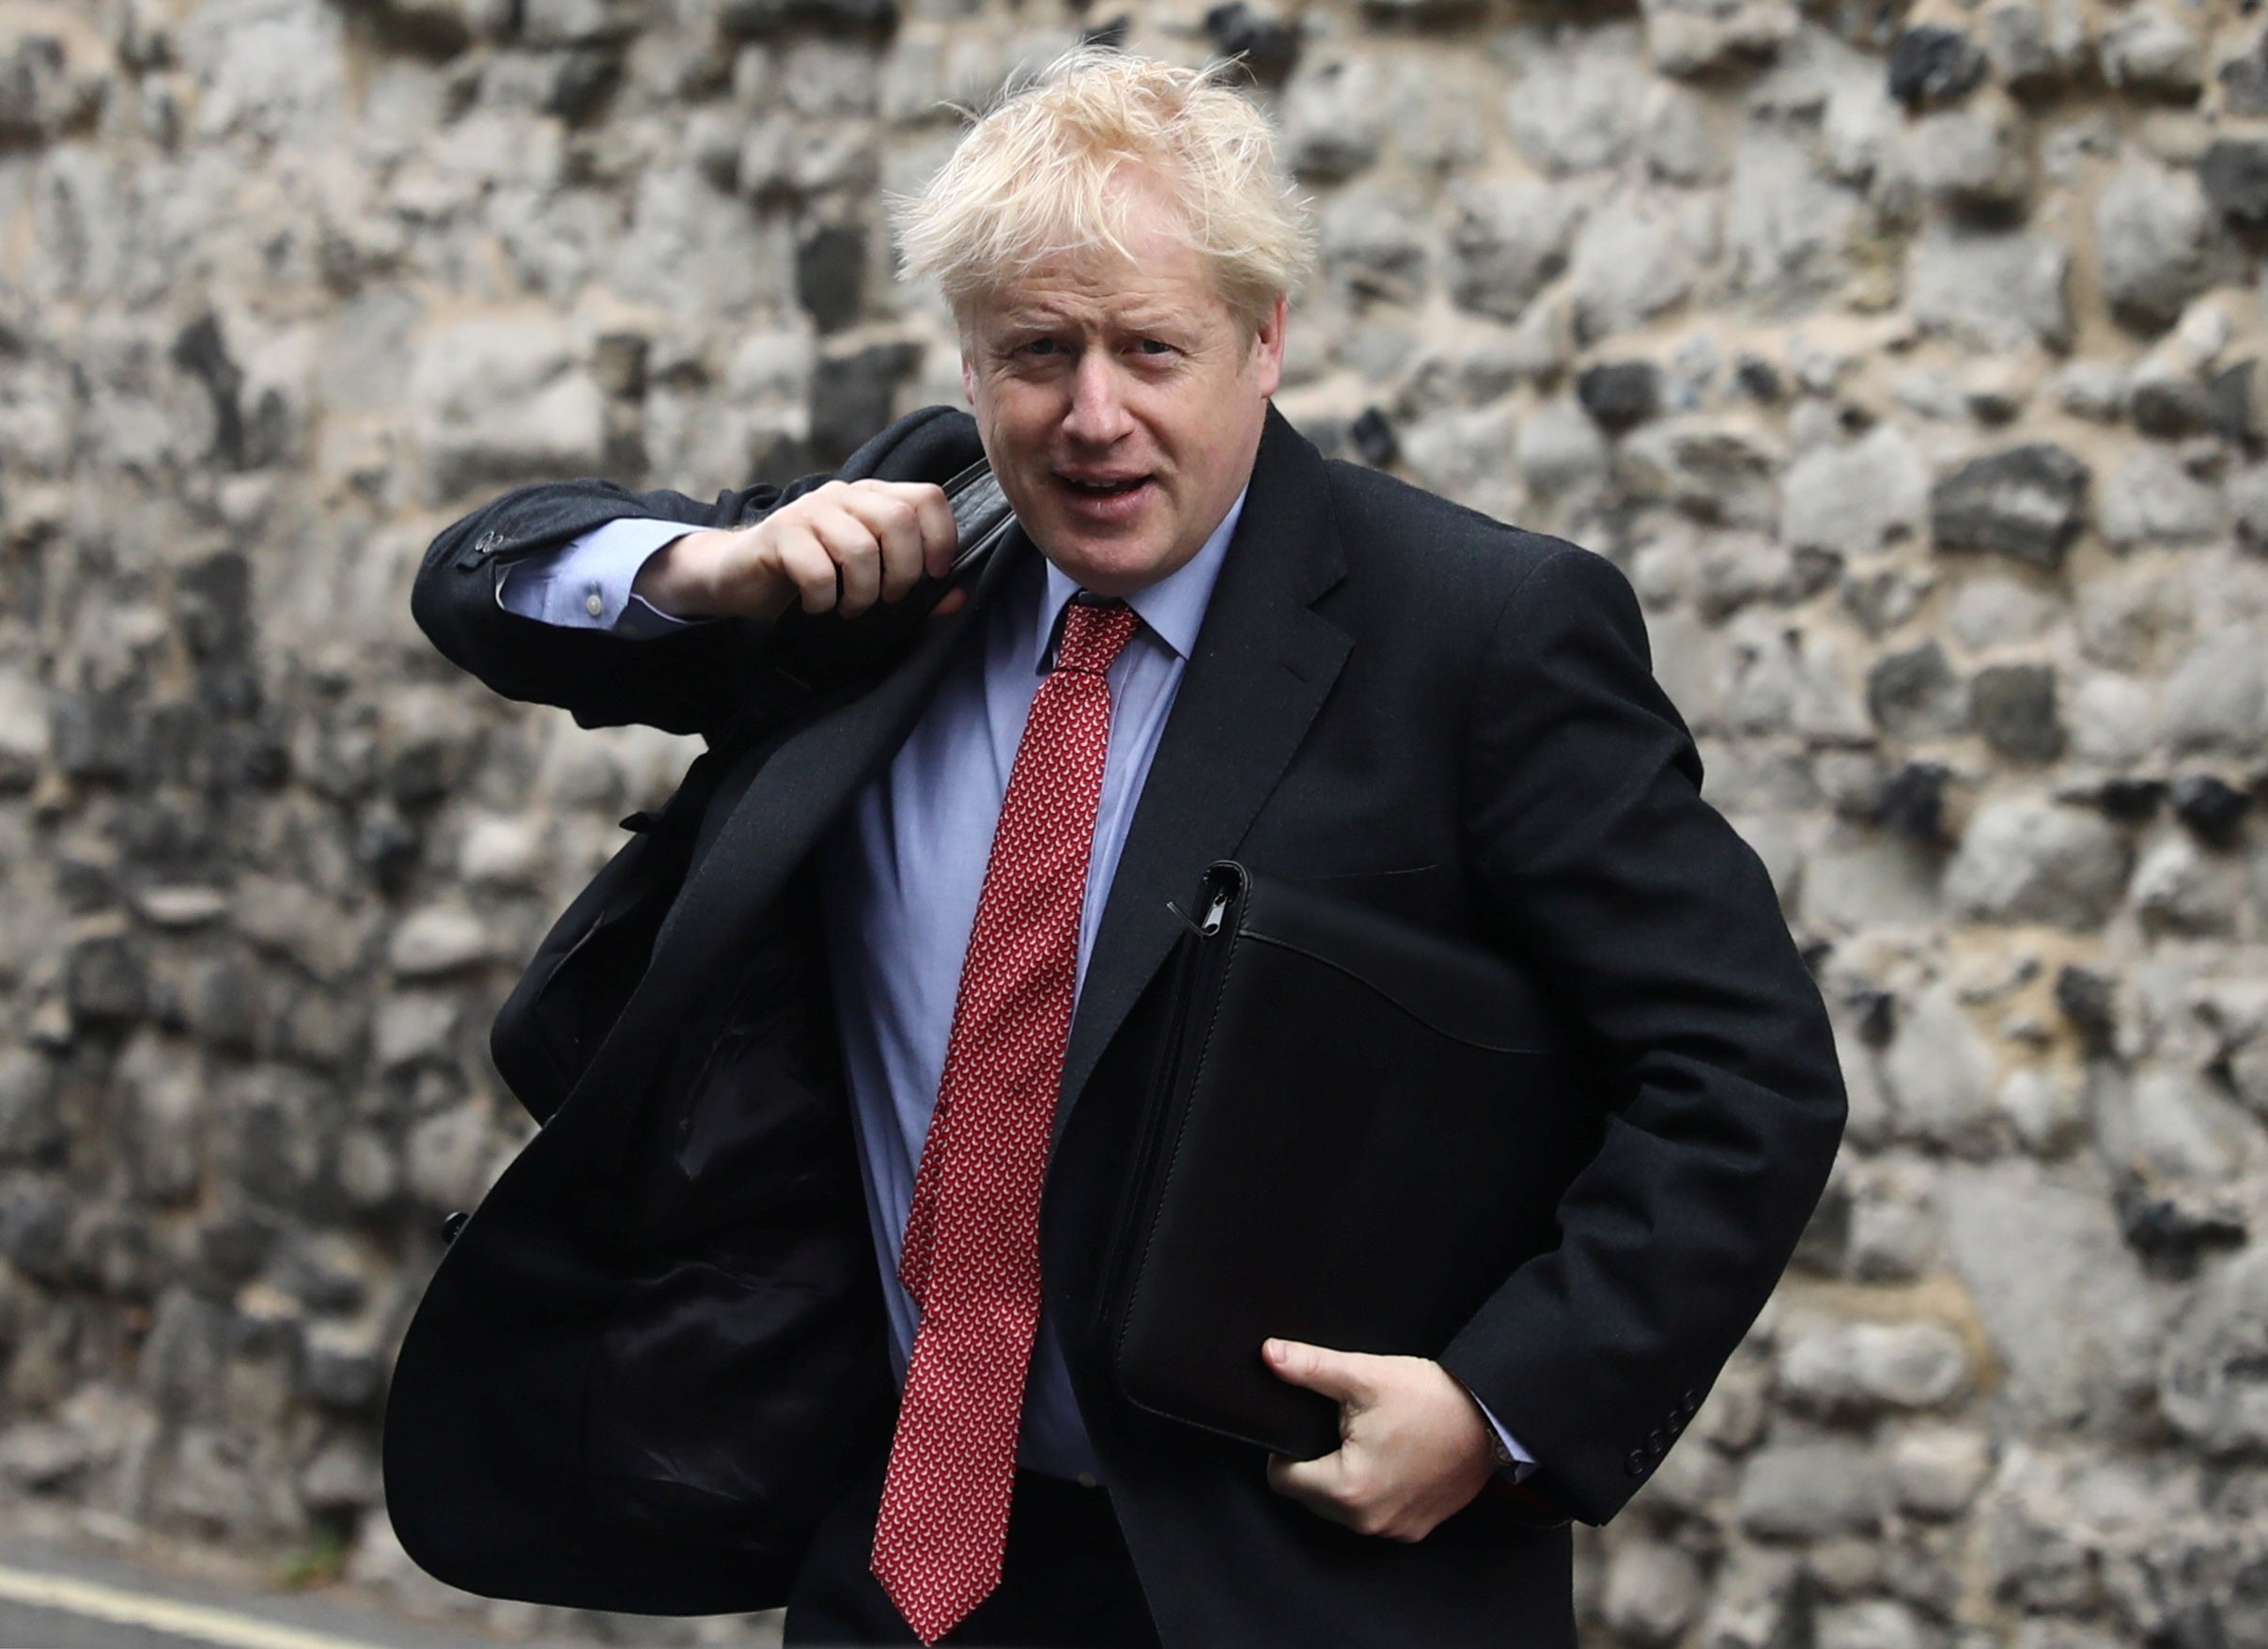 Boris Johnson is often compared to Trump, but he is even more dangerous – here's why